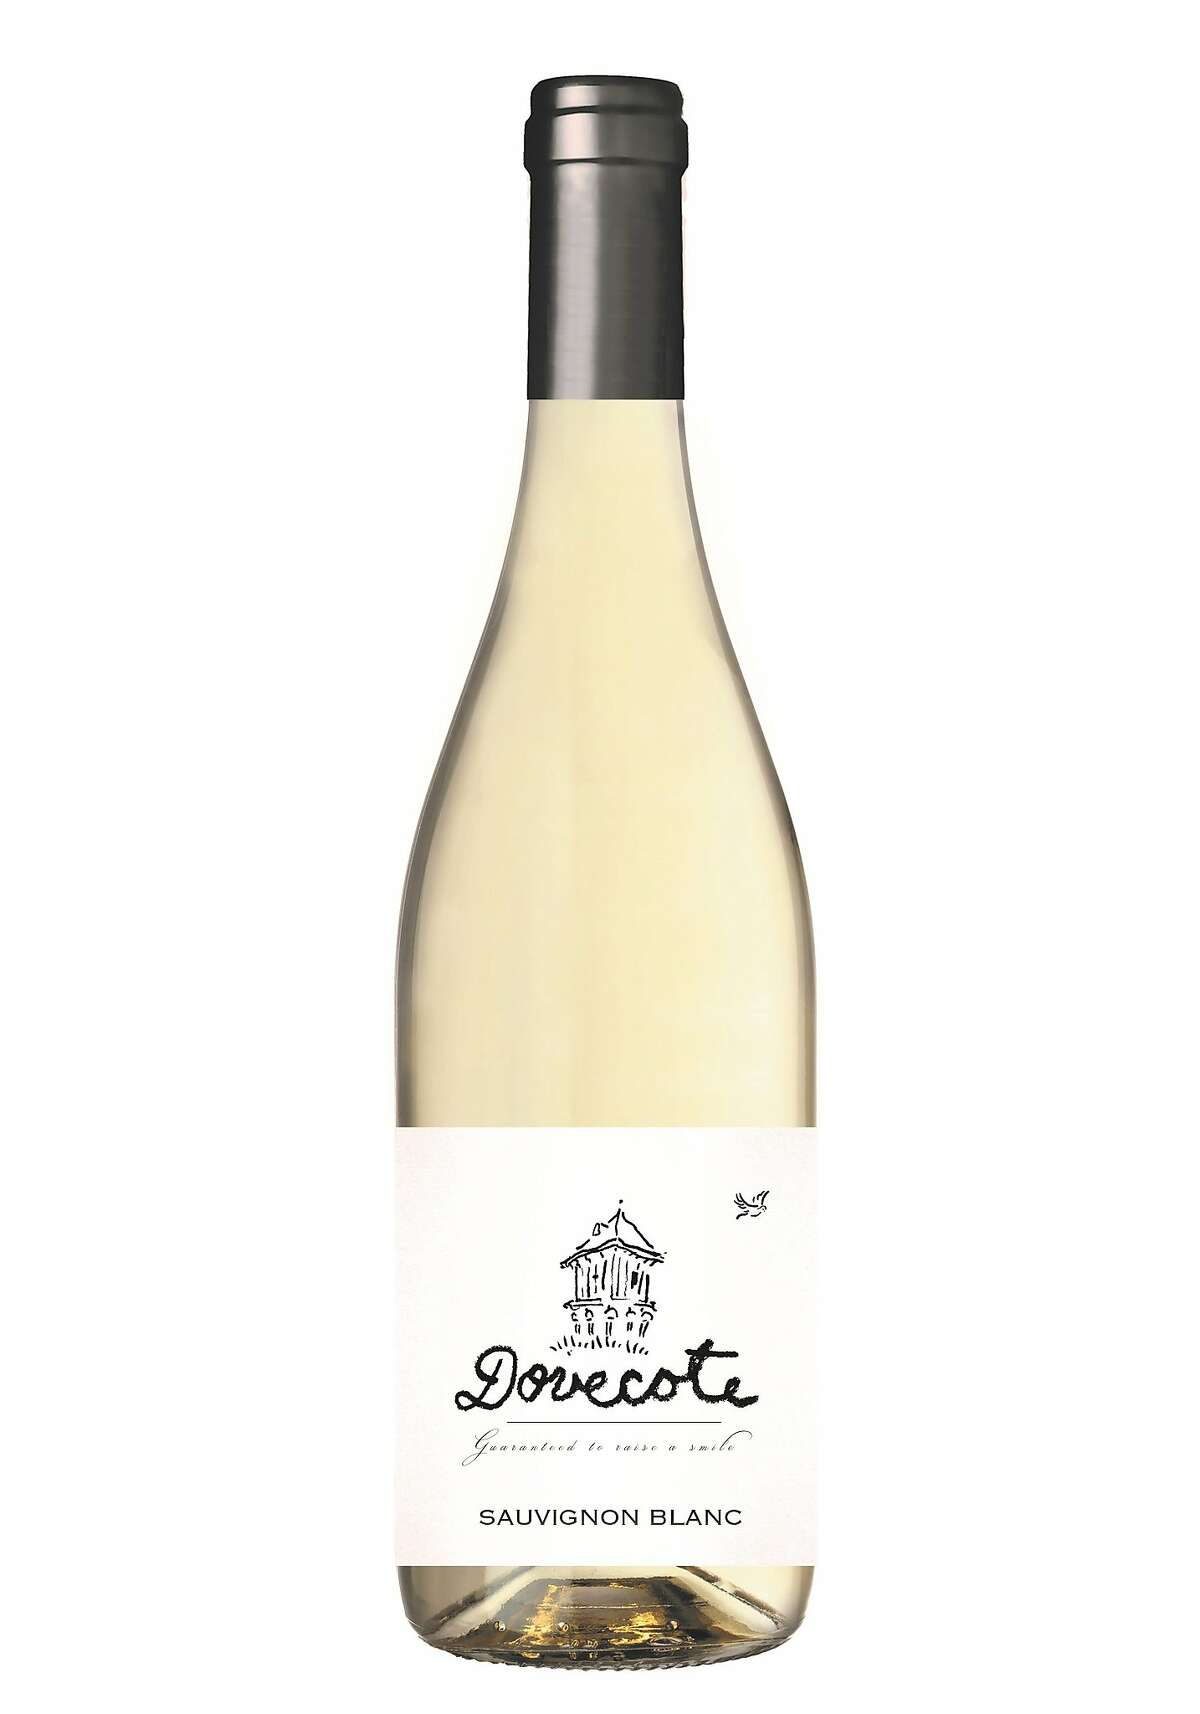 Dovecote C�tes de Gascogne Sauvignon Blanc, a wine made by Steve Lawrence and Diana Lucz. The couple left their jobs in Napa Valley when they bought a vineyard and winery in Bordeaux, France.